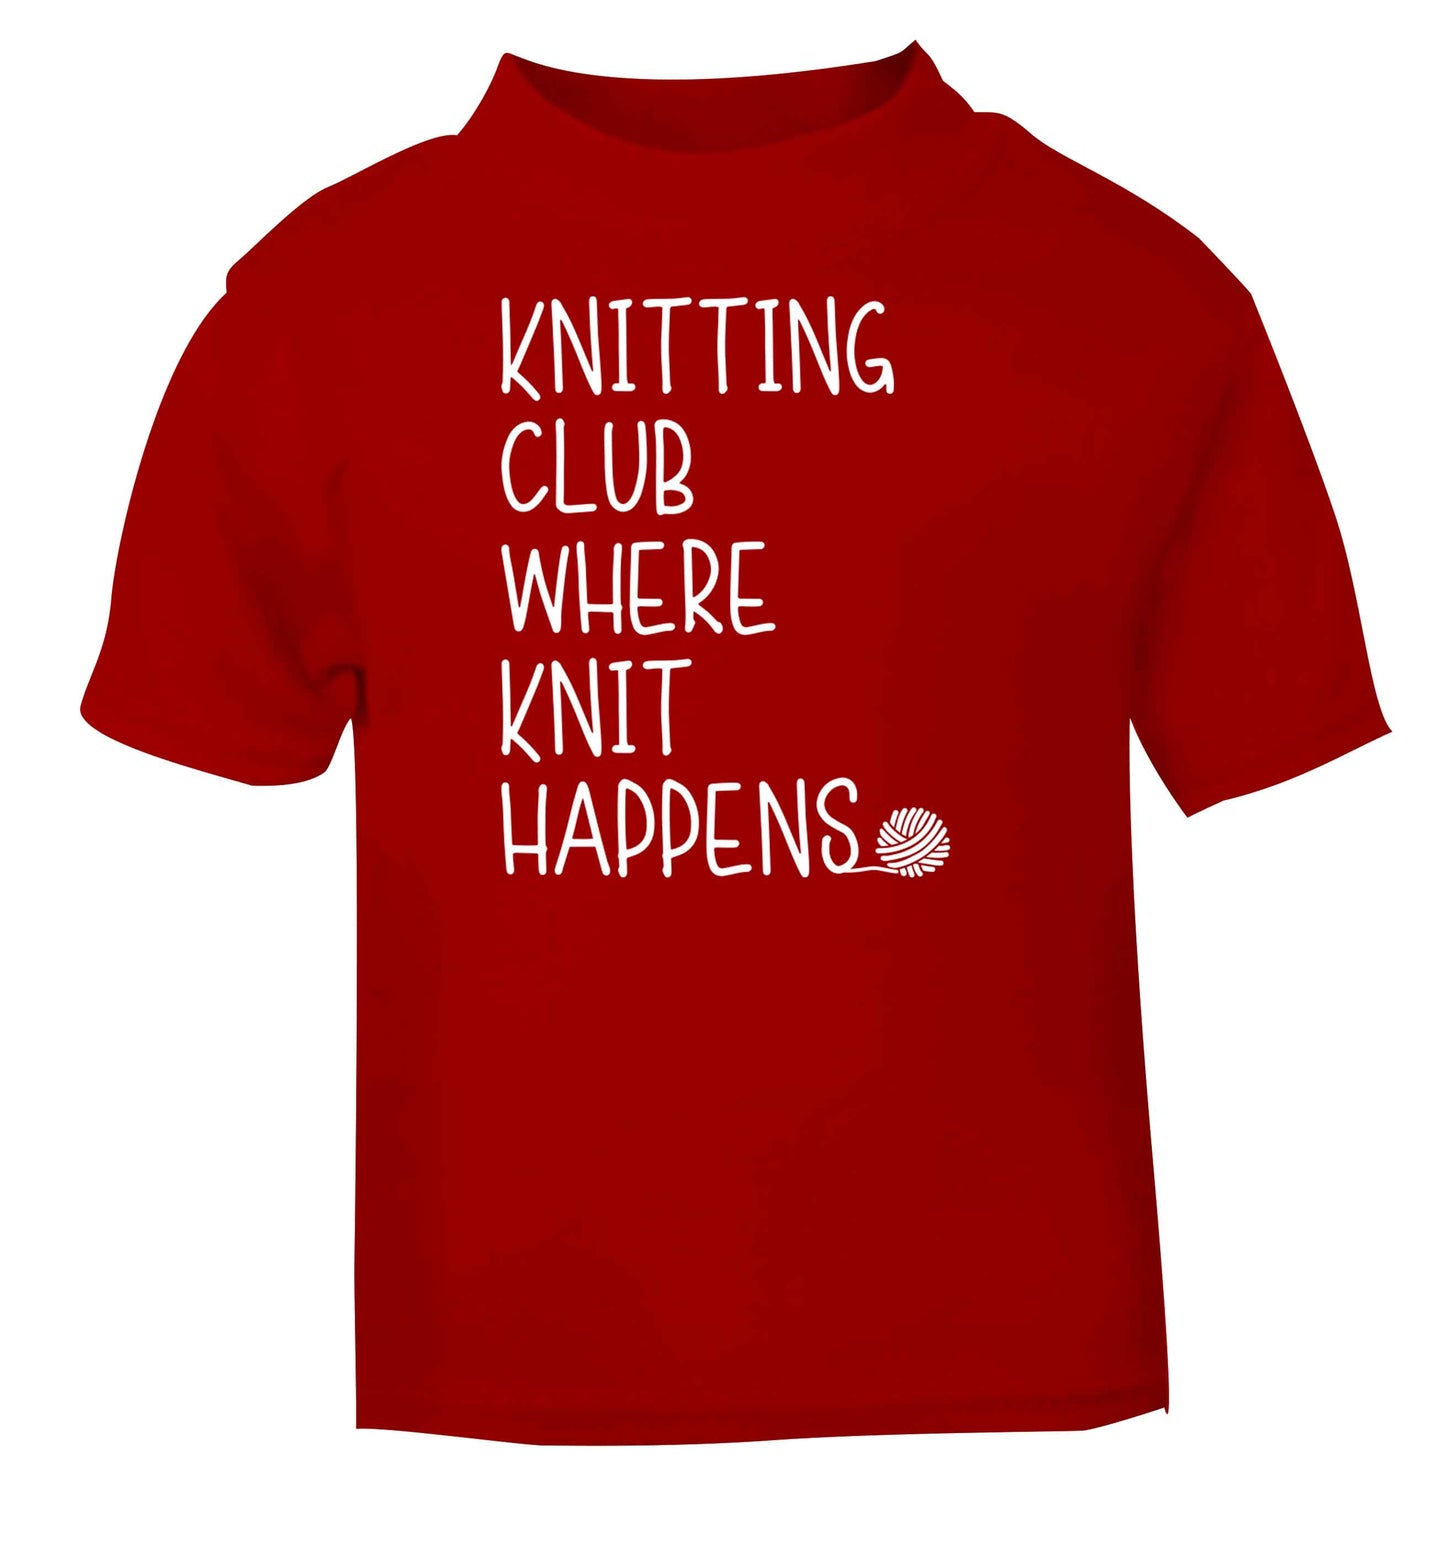 Knitting club where knit happens red baby toddler Tshirt 2 Years